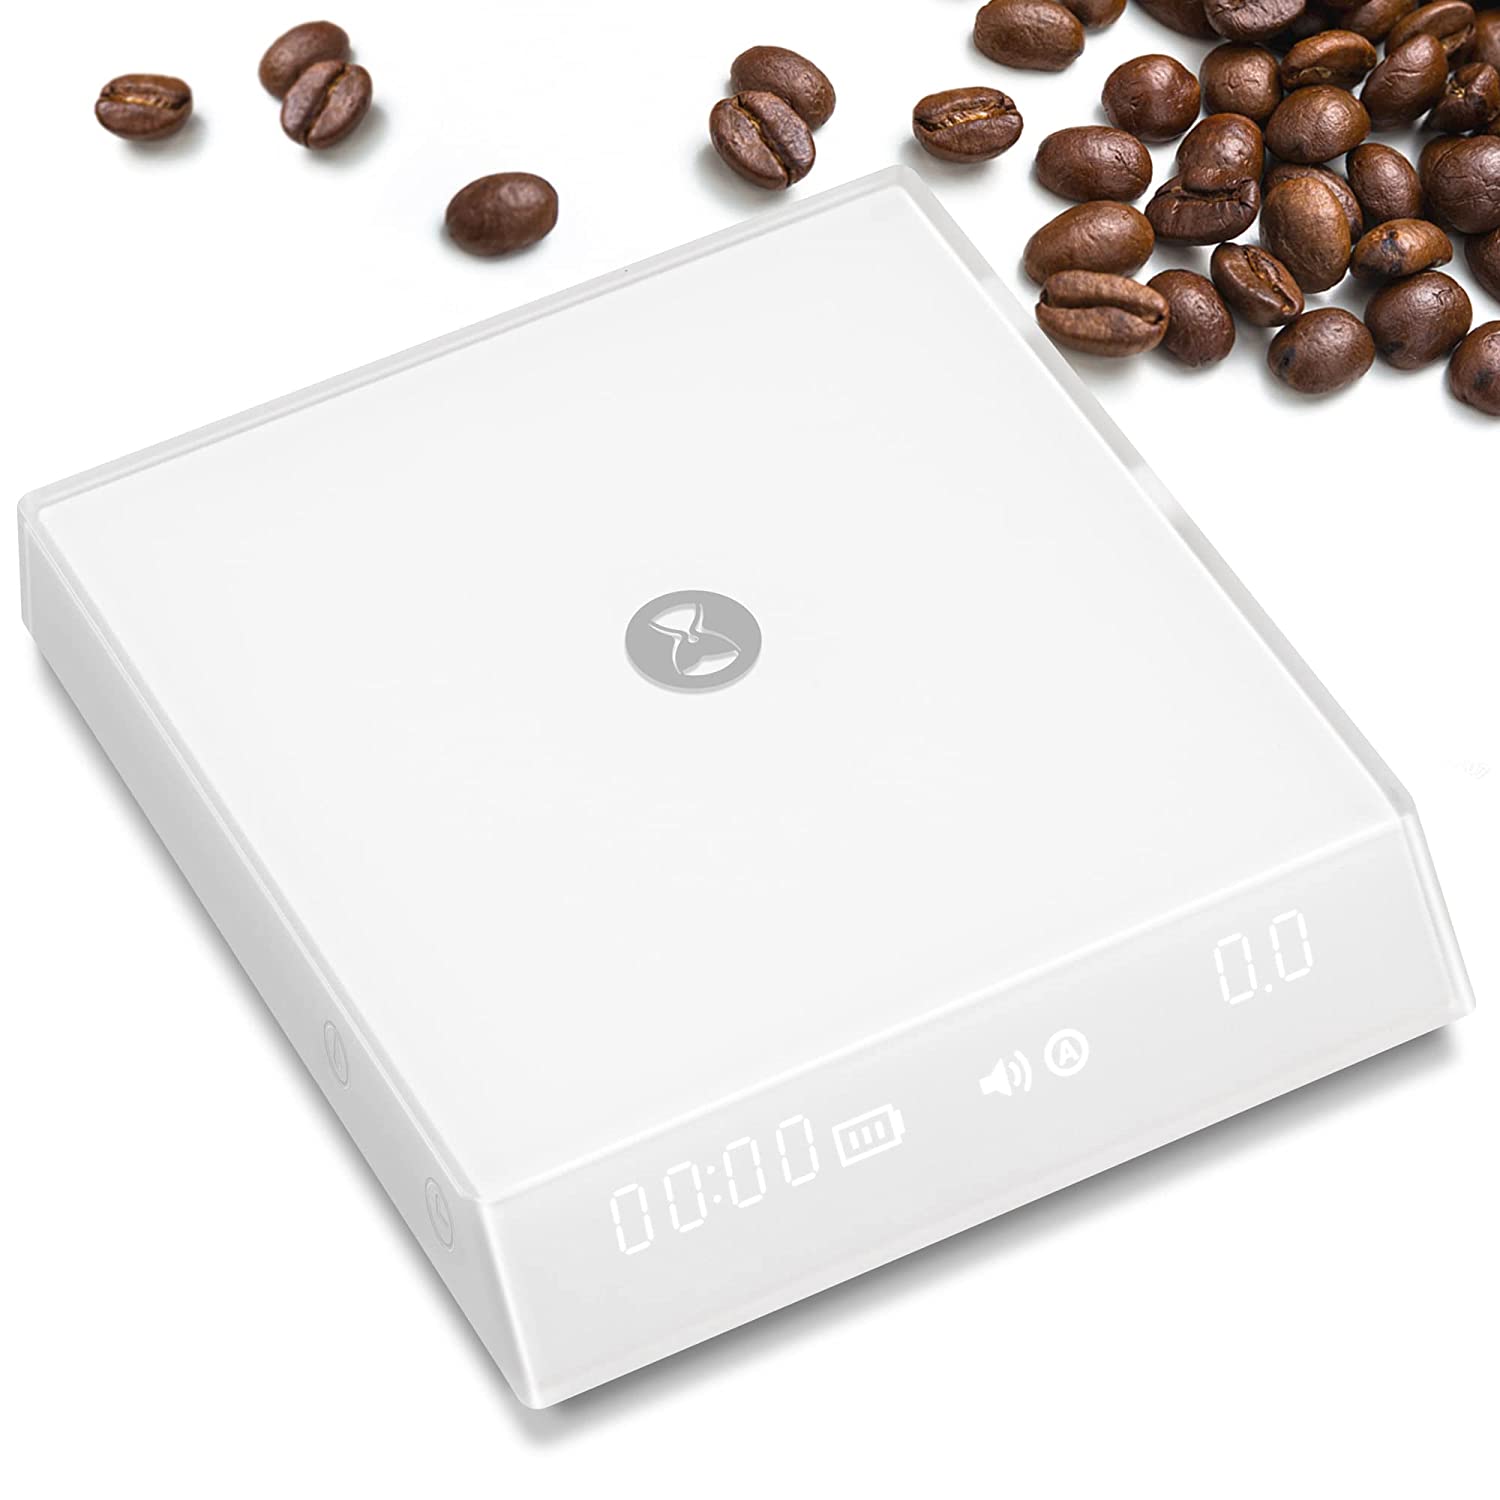 Timemore Coffee Scales With Timer, Espresso Scales with Flow Measurement, Digital Barista Scales With Automatic Time Measuring Mode for Pour Over & Espresso, 2000 g/0.1 G, Black Mirror Nano, White